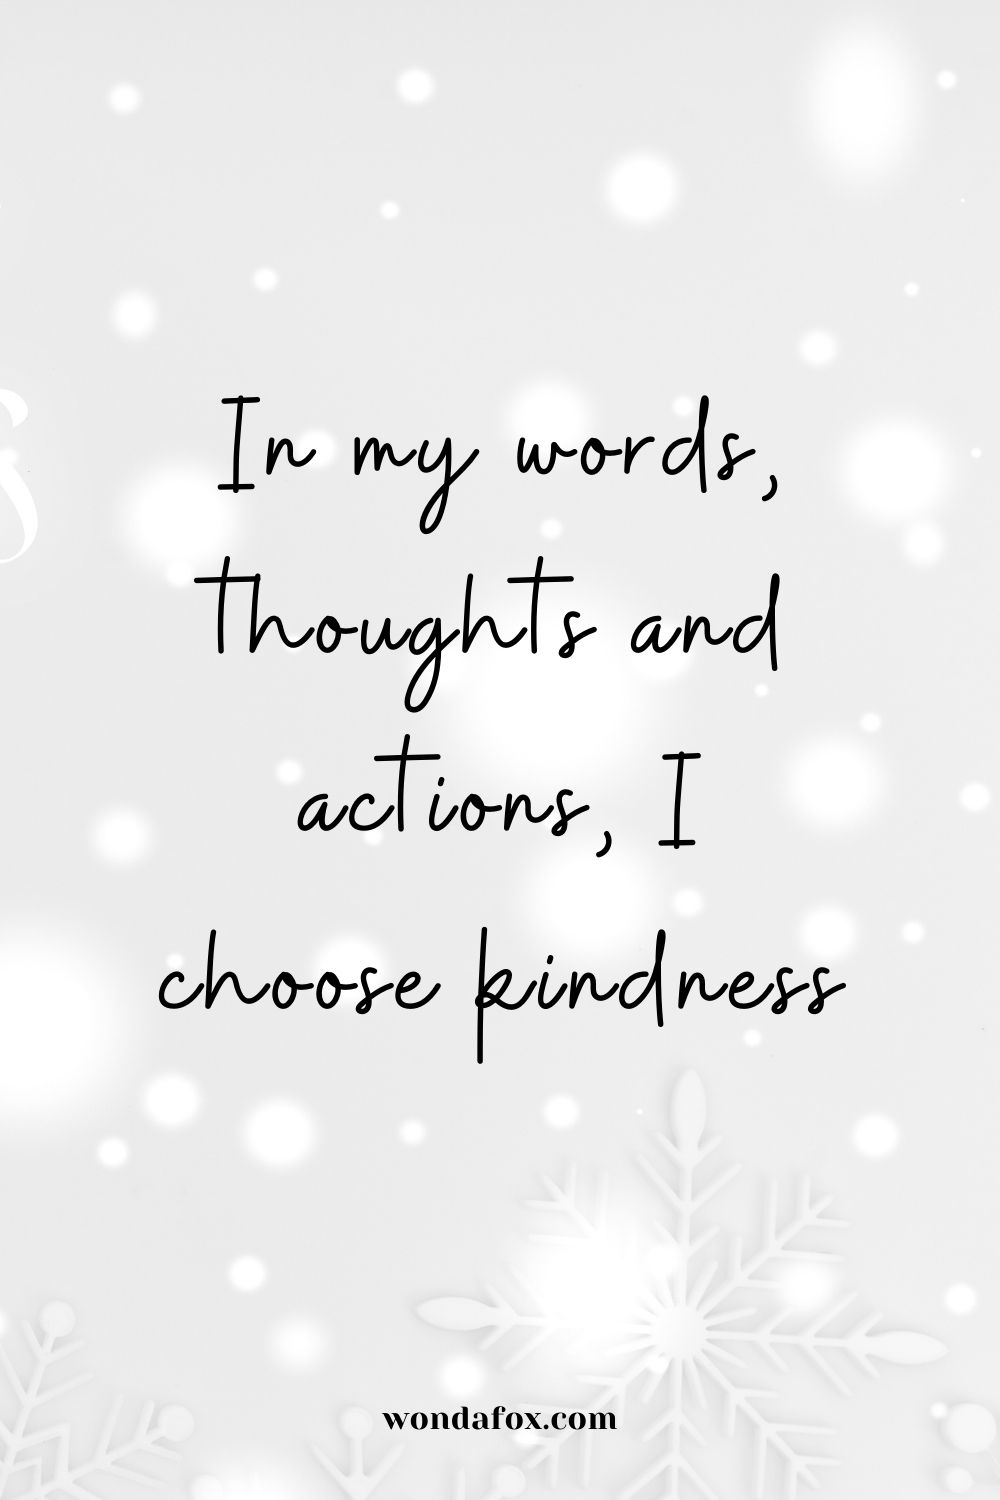  In my words, thoughts and actions, I choose kindness